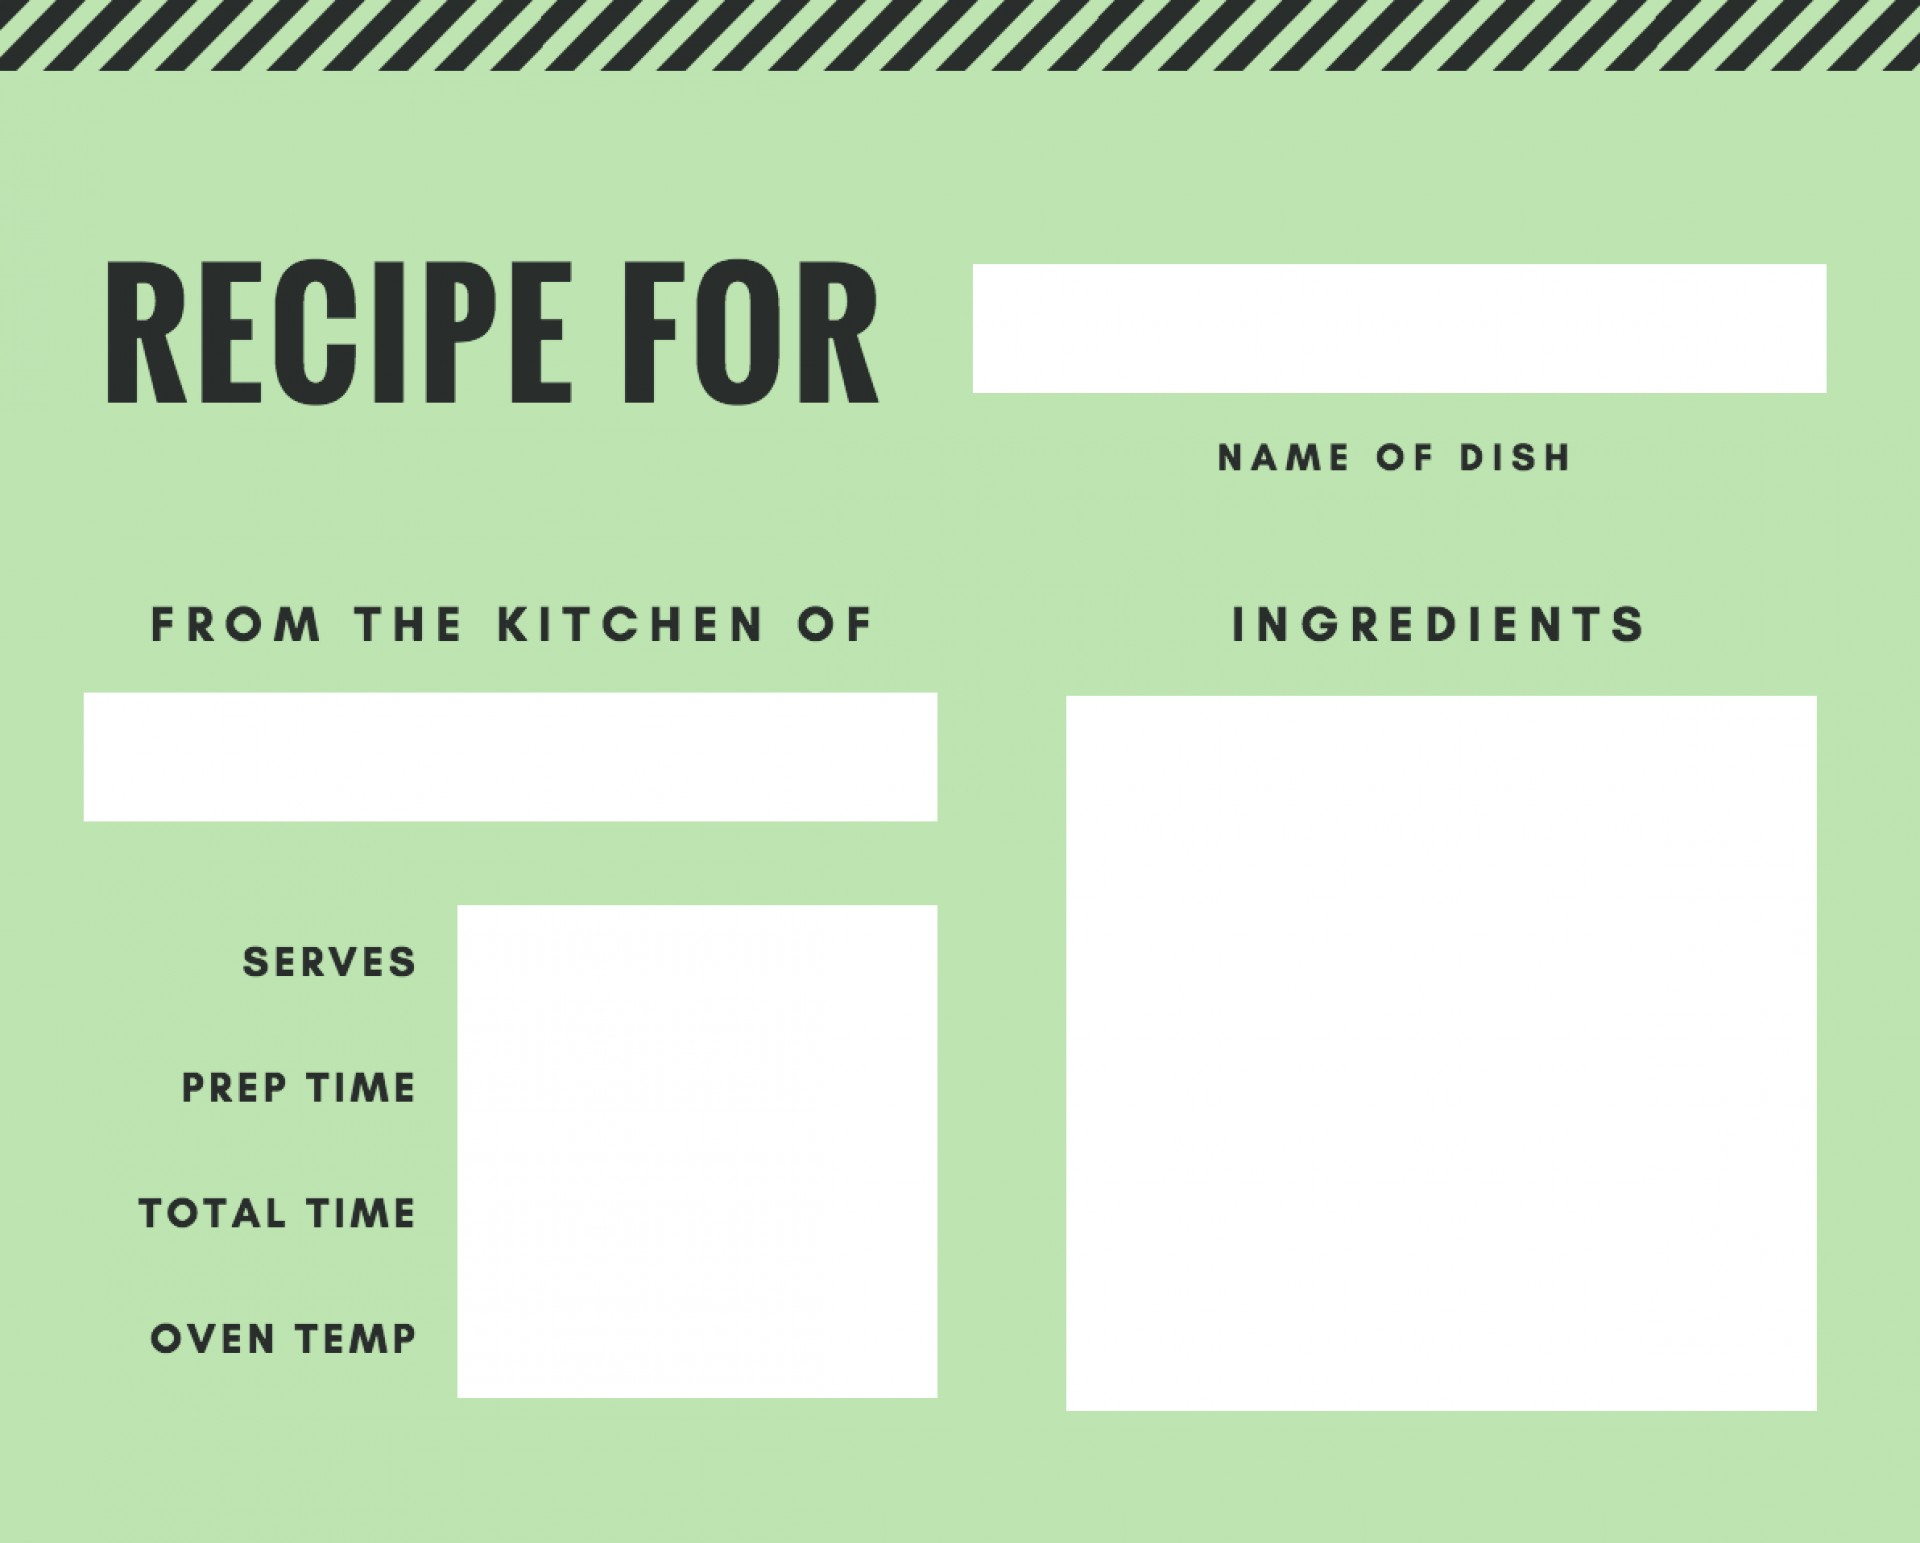 008 Recipe Card Maker Ms Word Template 1920X1544 Microsoft Pertaining To Free Recipe Card Templates For Microsoft Word